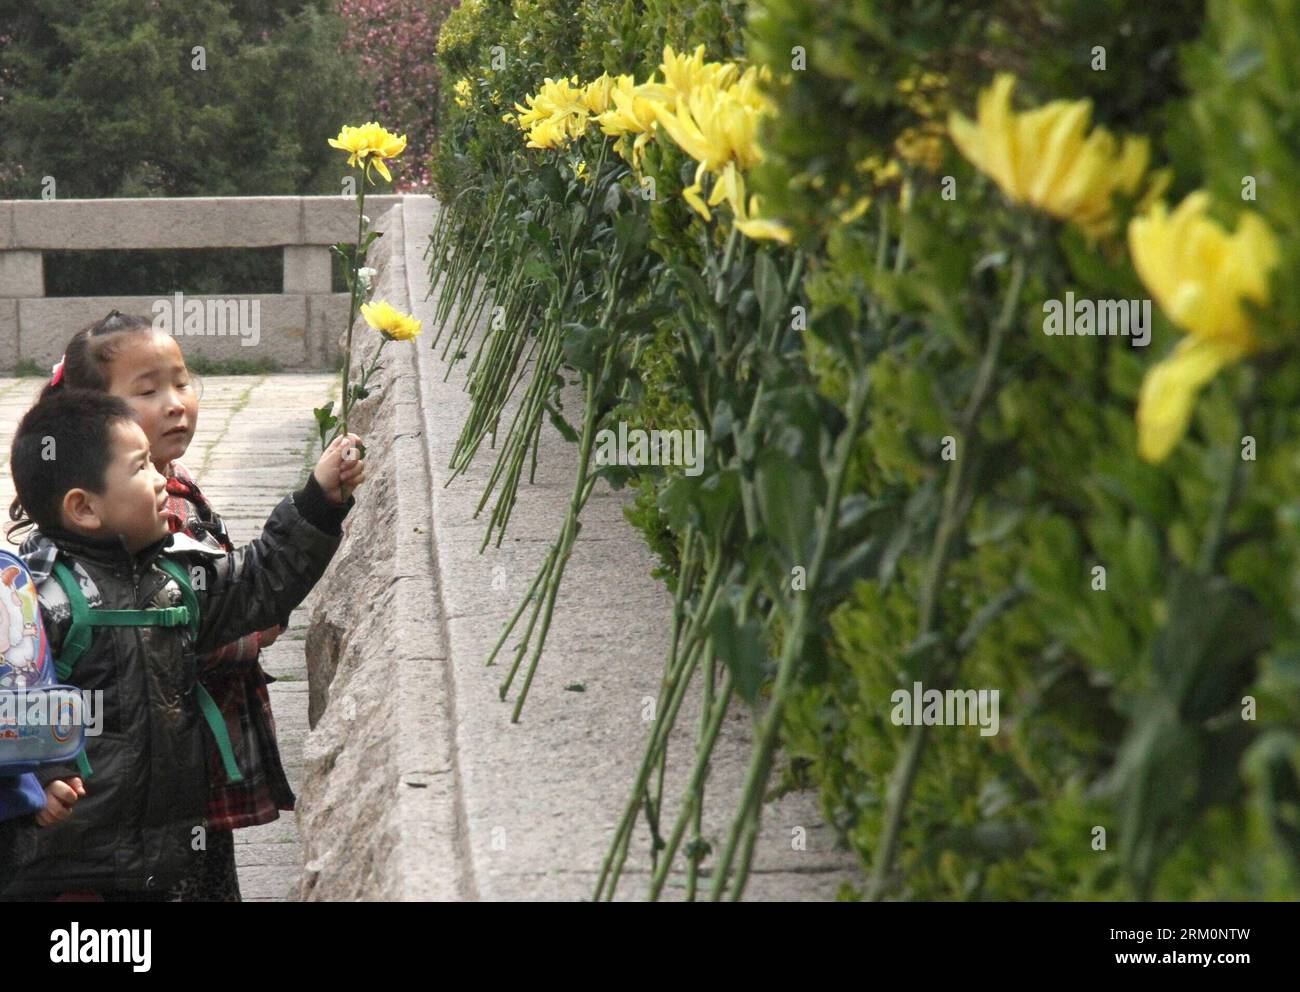 Bildnummer: 59460483  Datum: 30.03.2013  Copyright: imago/Xinhua Children present flowers to a monument at Yuhuatai Martyr Cemetery in Nanjing, capital of east China s Jiangsu Province, March 30, 2013, to pay respect to martyrs ahead of the Qingming Festival, or Tomb Sweeping Day, which falls on April 4 this year. (Xinhua/Xu Yijia) (ry) CHINA-QINGMING FESTIVAL-MEMORIAL CEREMONIES (CN) PUBLICATIONxNOTxINxCHN Gesellschaft xas x2x 2013 quer o0 Friedhof Trauer Gedenken  Totenfest Totengedenken Blumen     59460483 Date 30 03 2013 Copyright Imago XINHUA Children Present Flowers to a Monument AT Yuhu Stock Photo